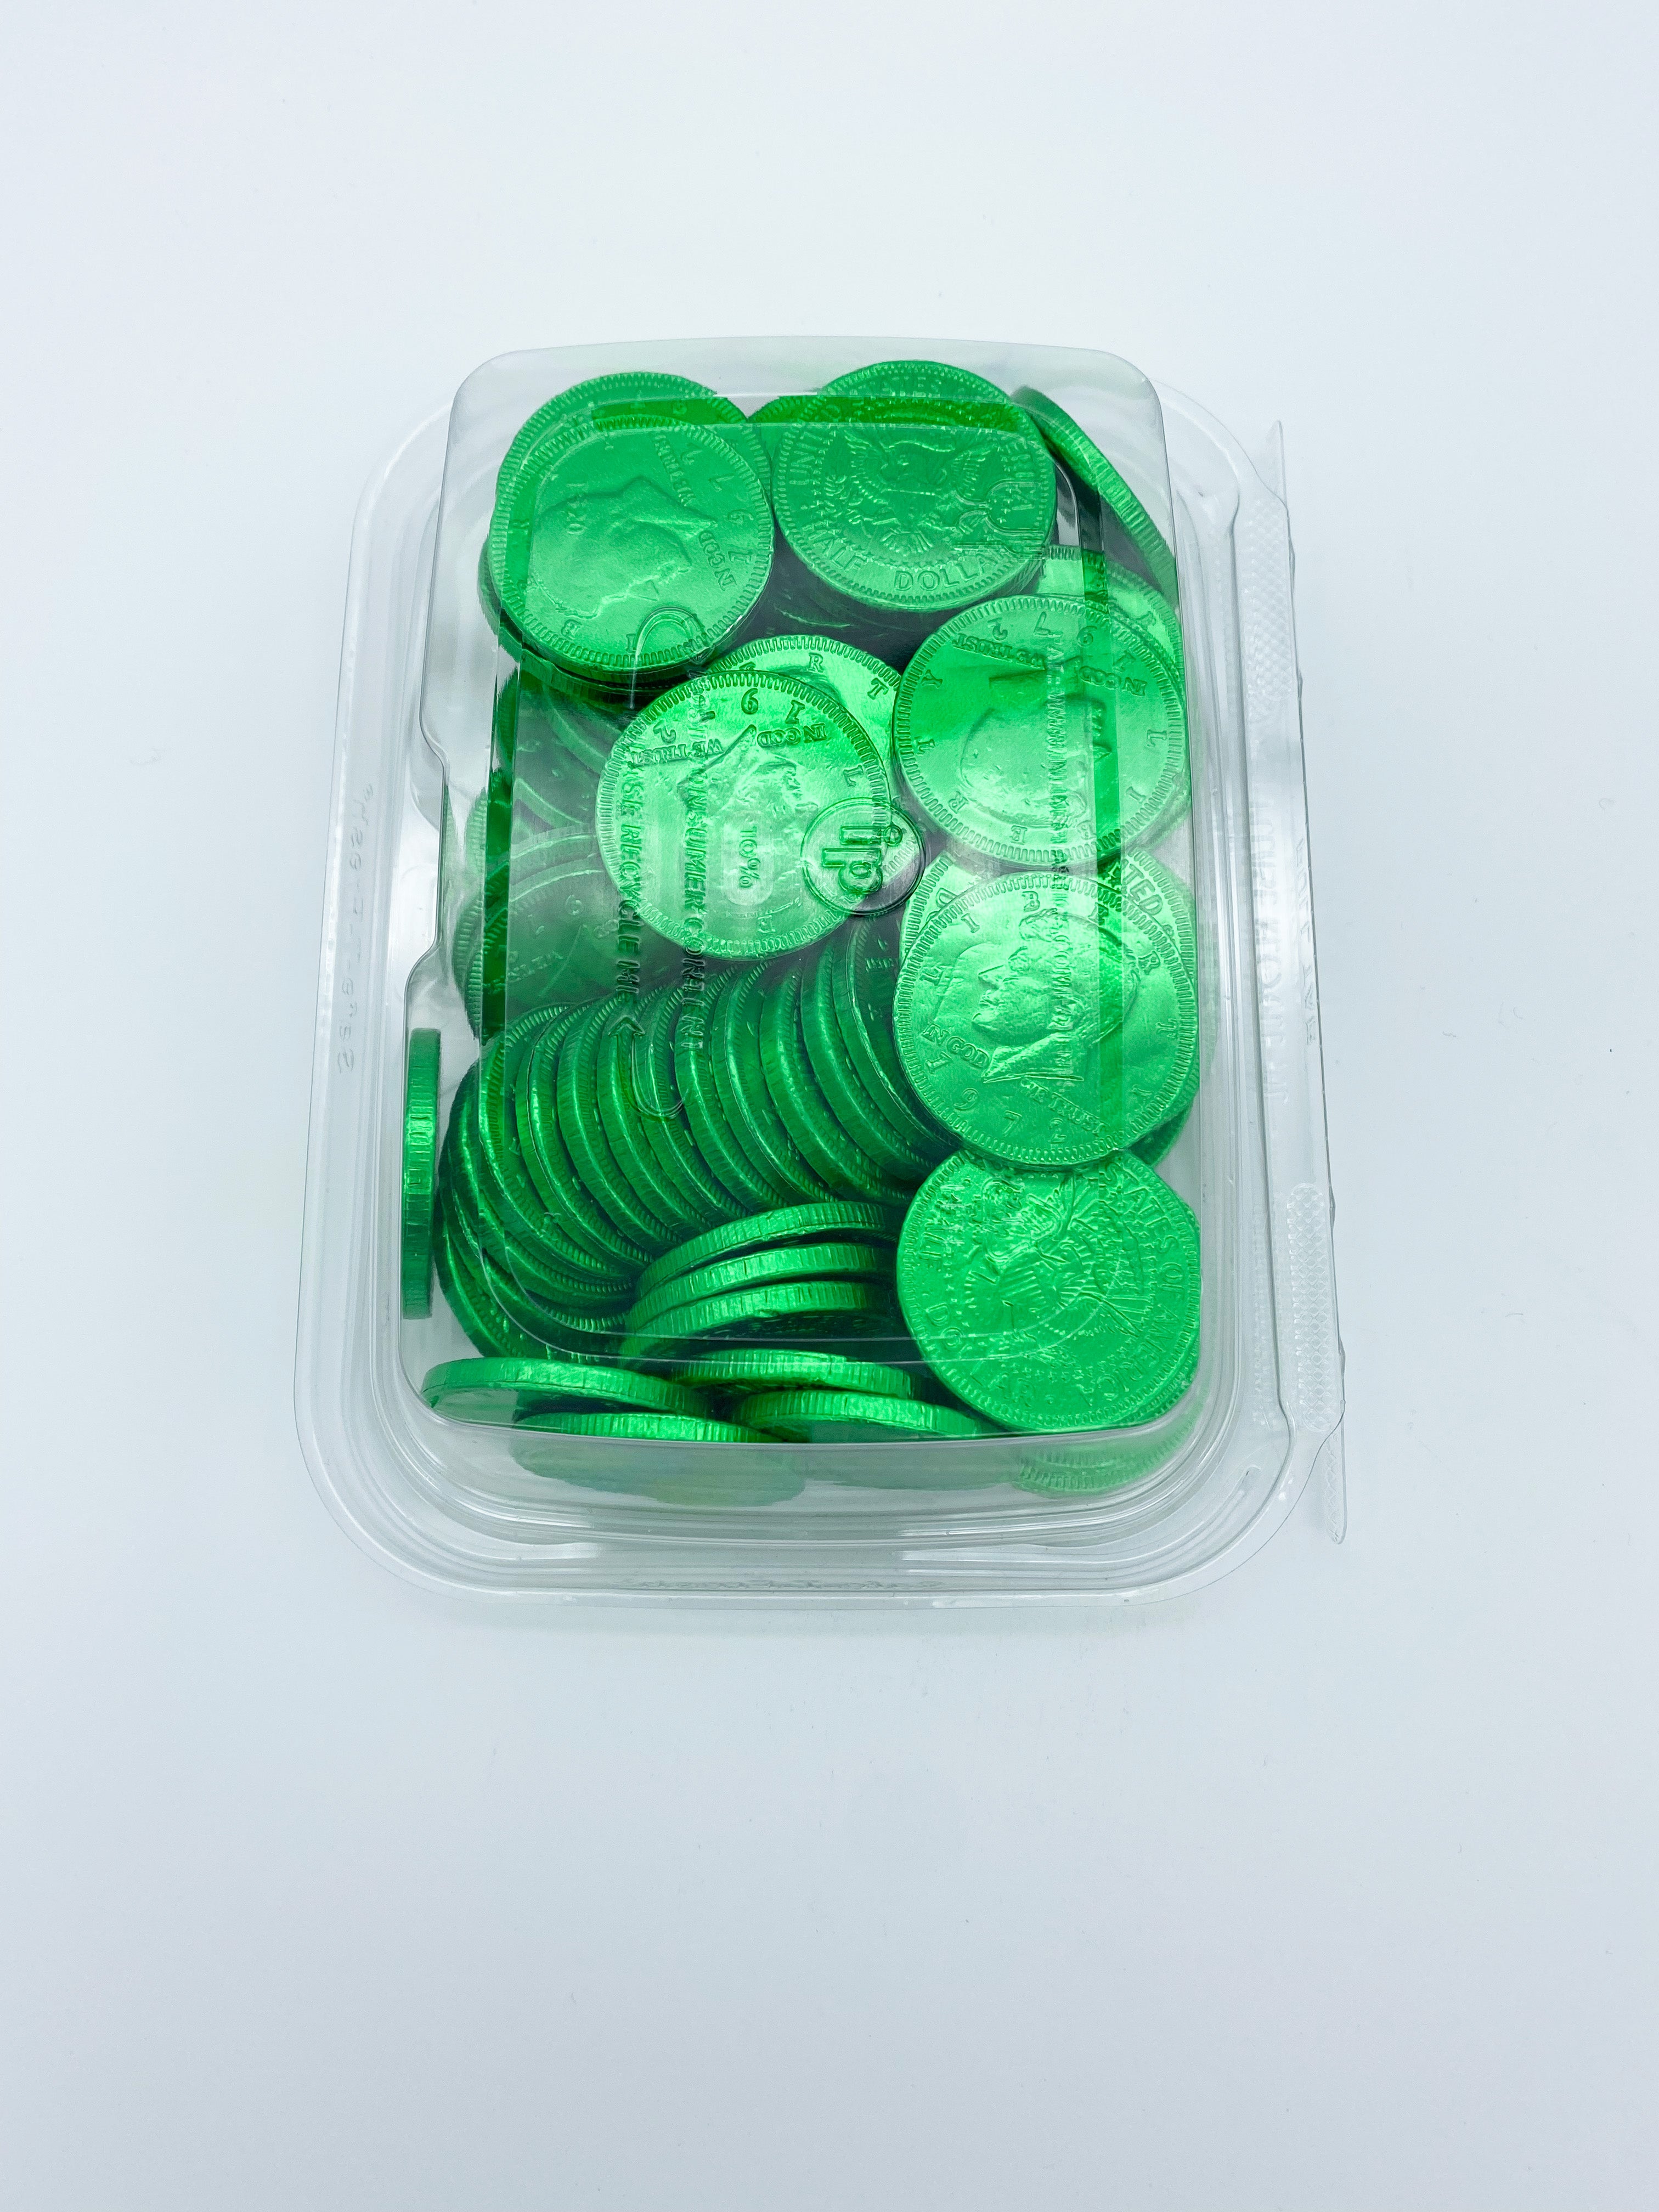 GREEN CHOCOLATE COINS